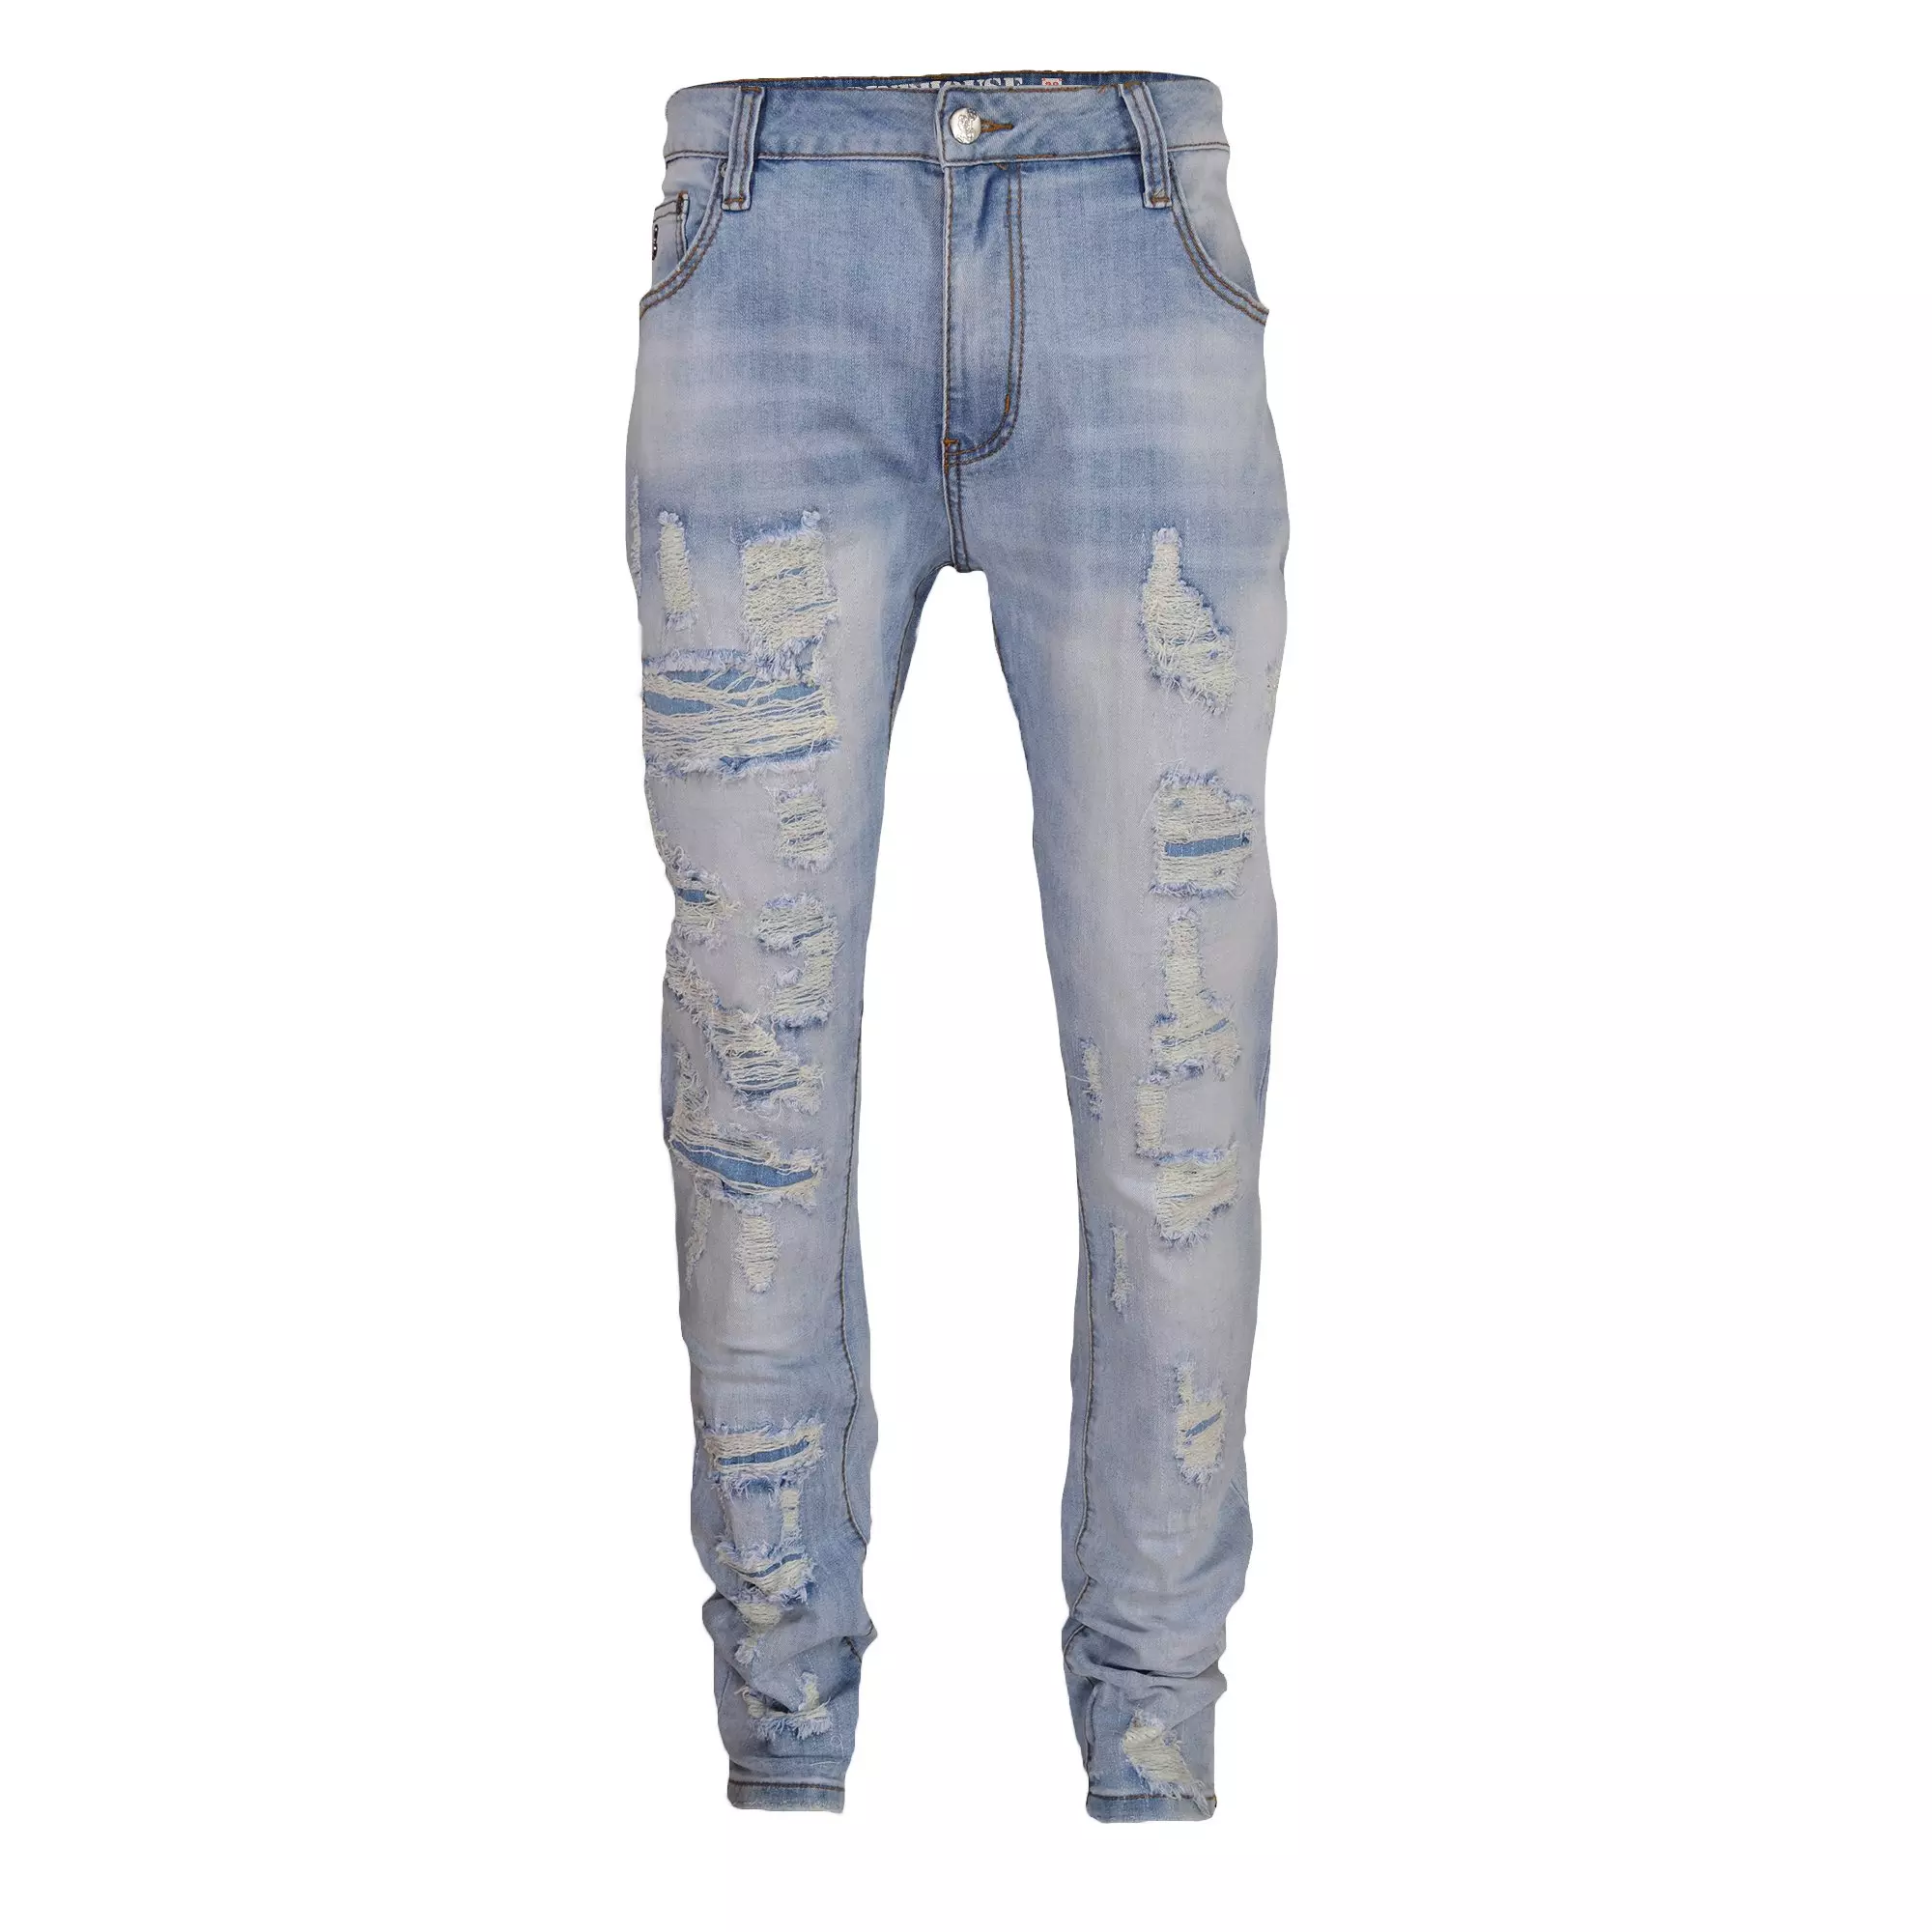 RIPPED SLIM FIT JEANS - Light blue